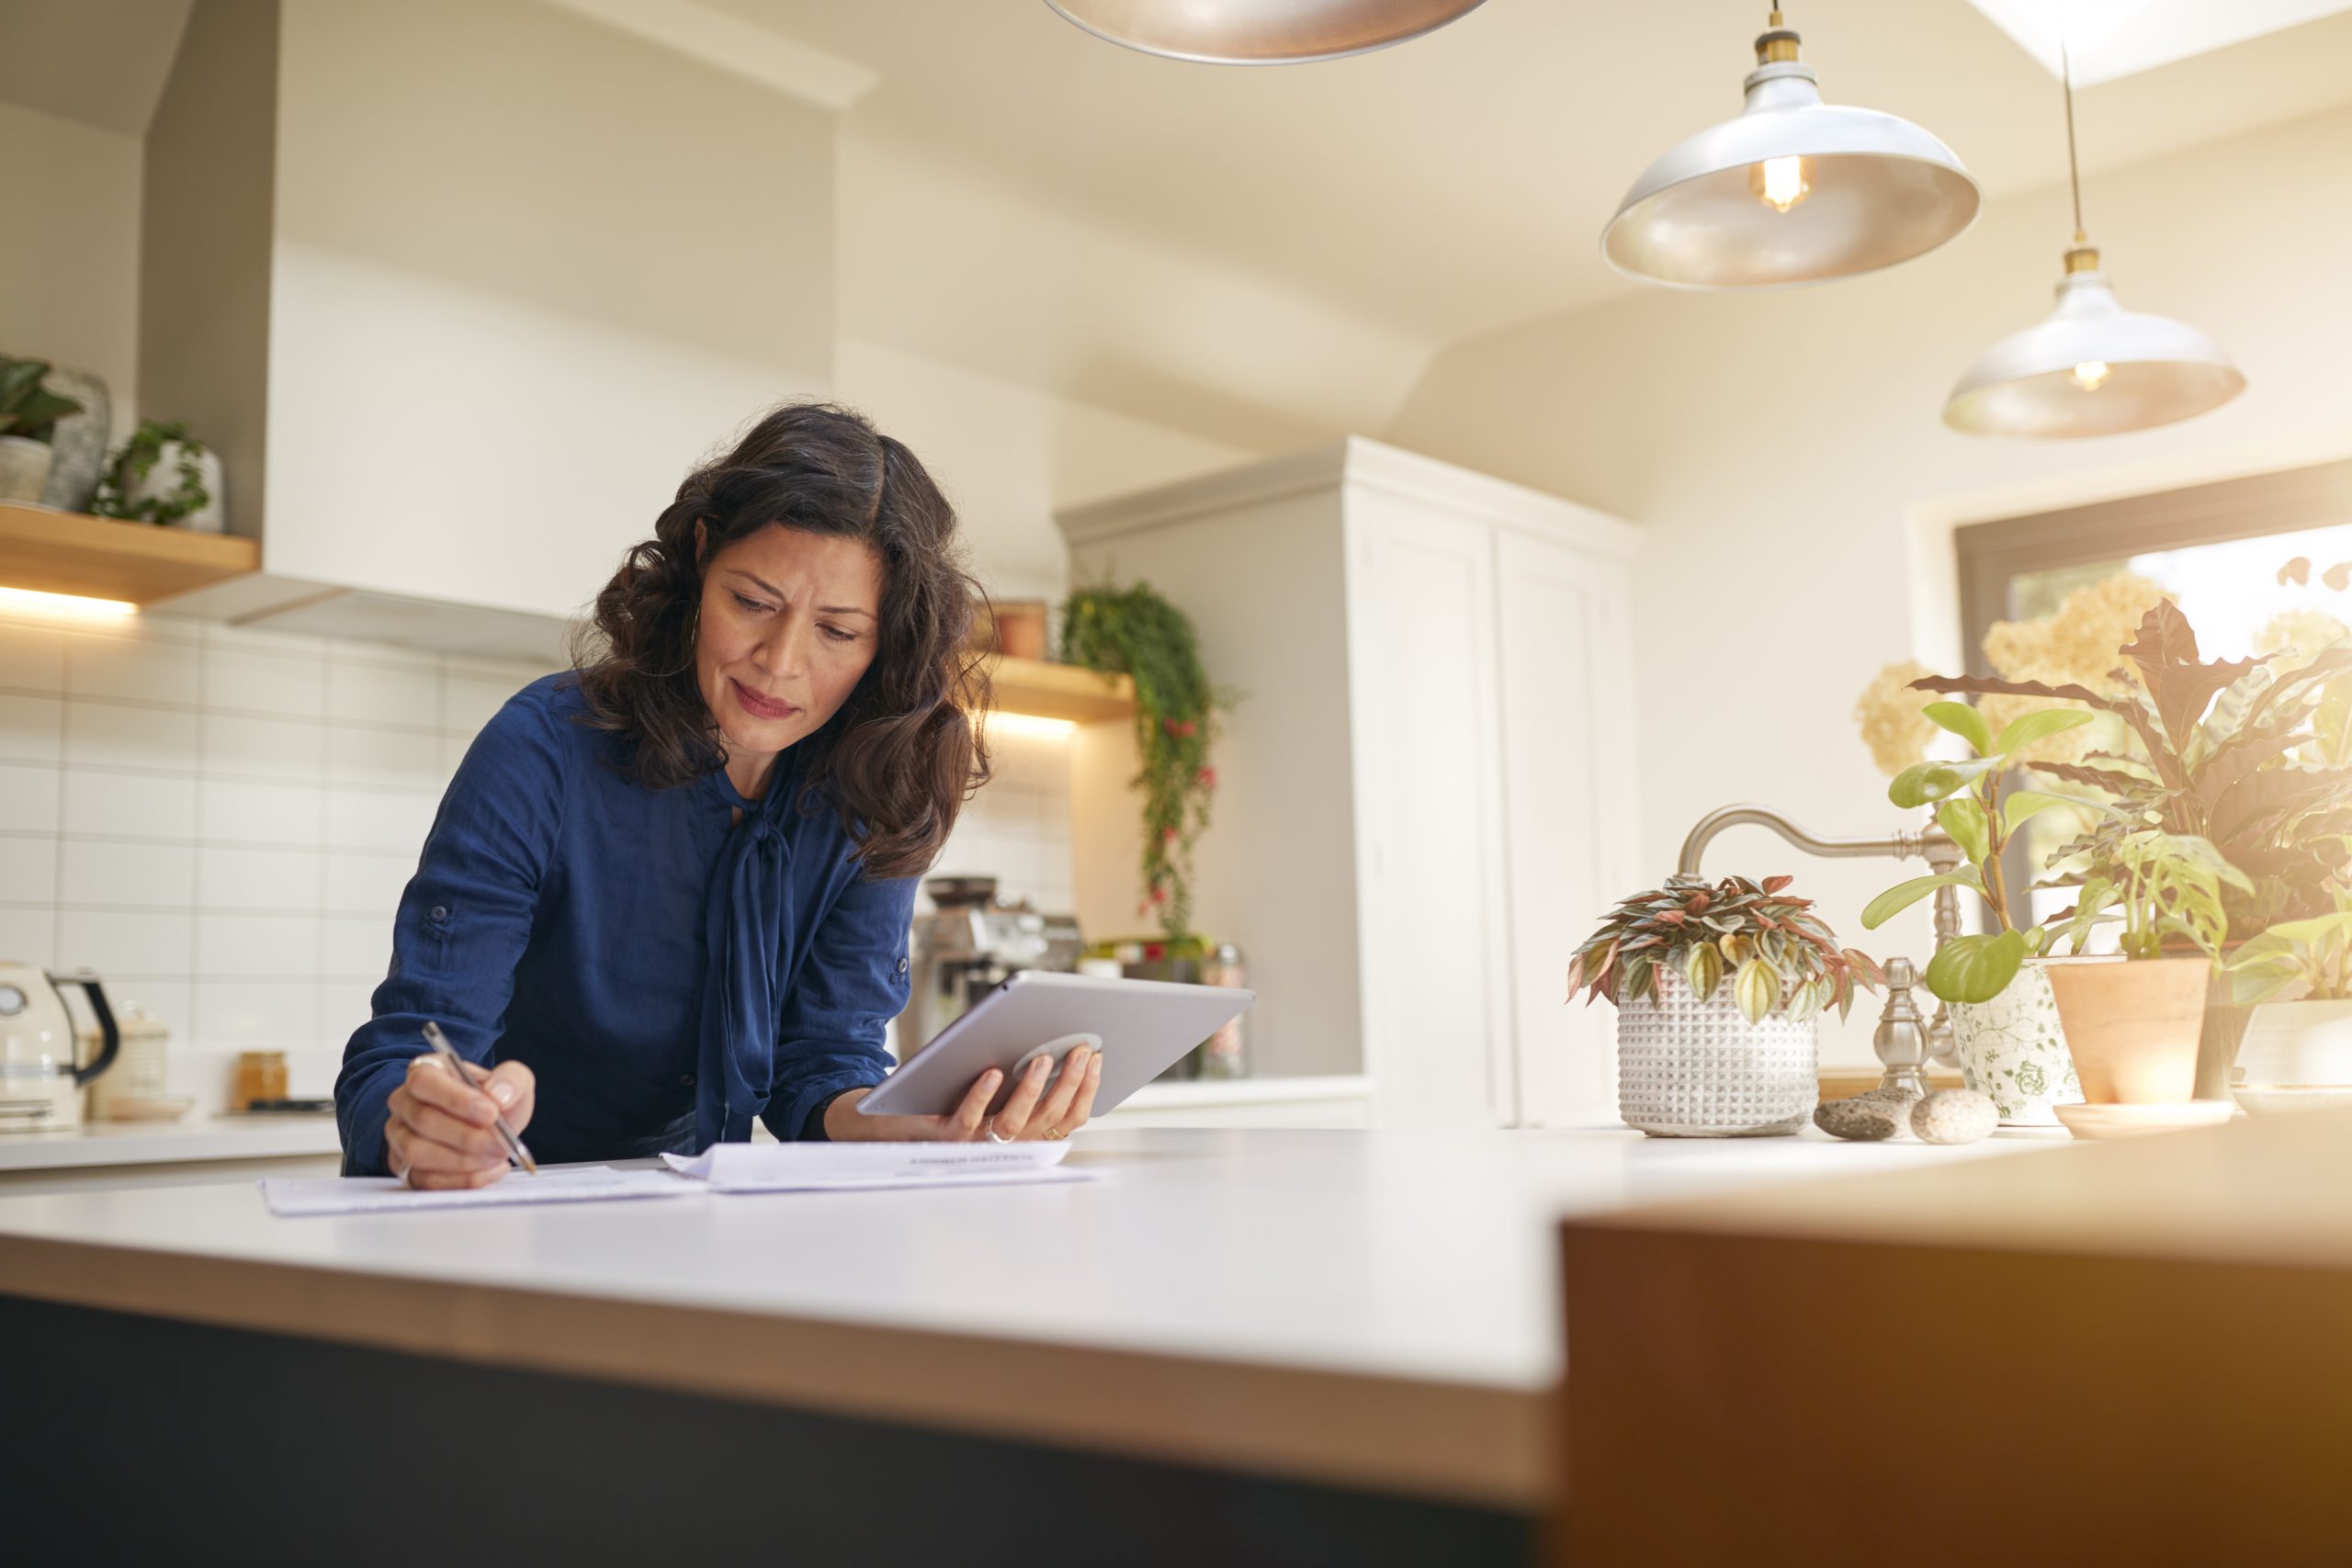 Mature Woman With Digital Device Reviewing Paperwork In Kitchen and thinking About who She will appoint as an executor of her will.